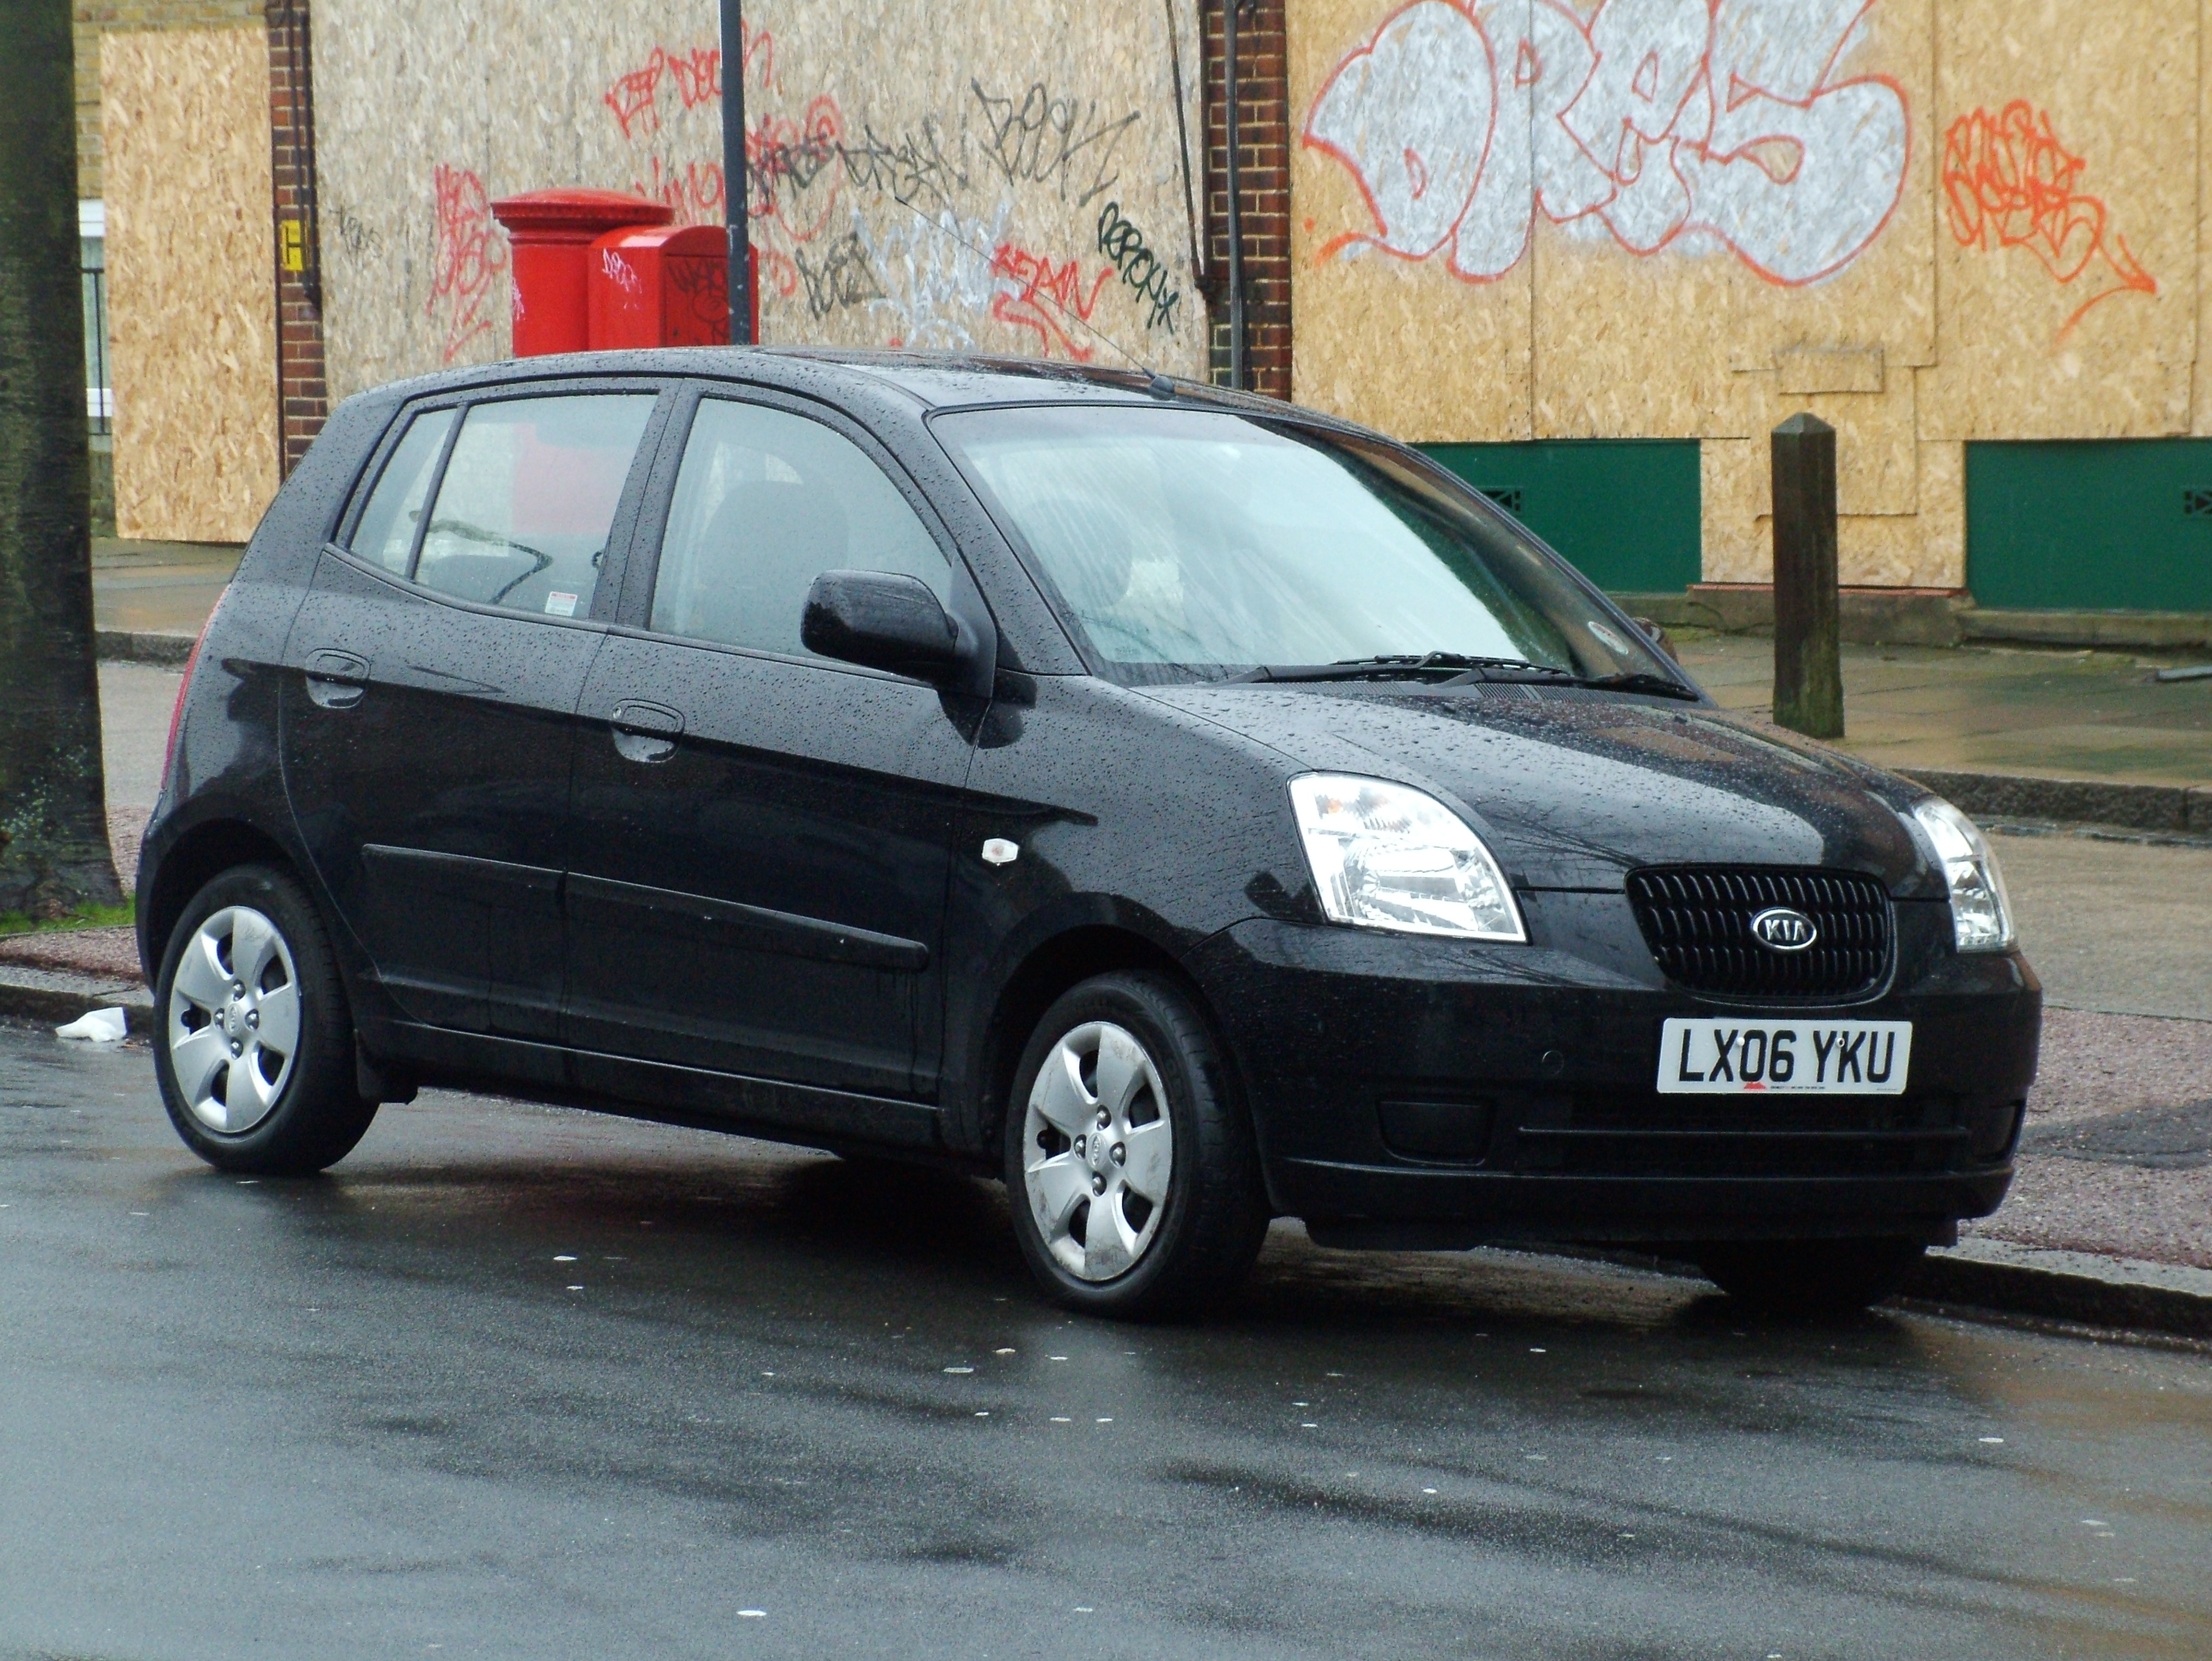 Picanto Lx | Flickr - Photo Sharing!